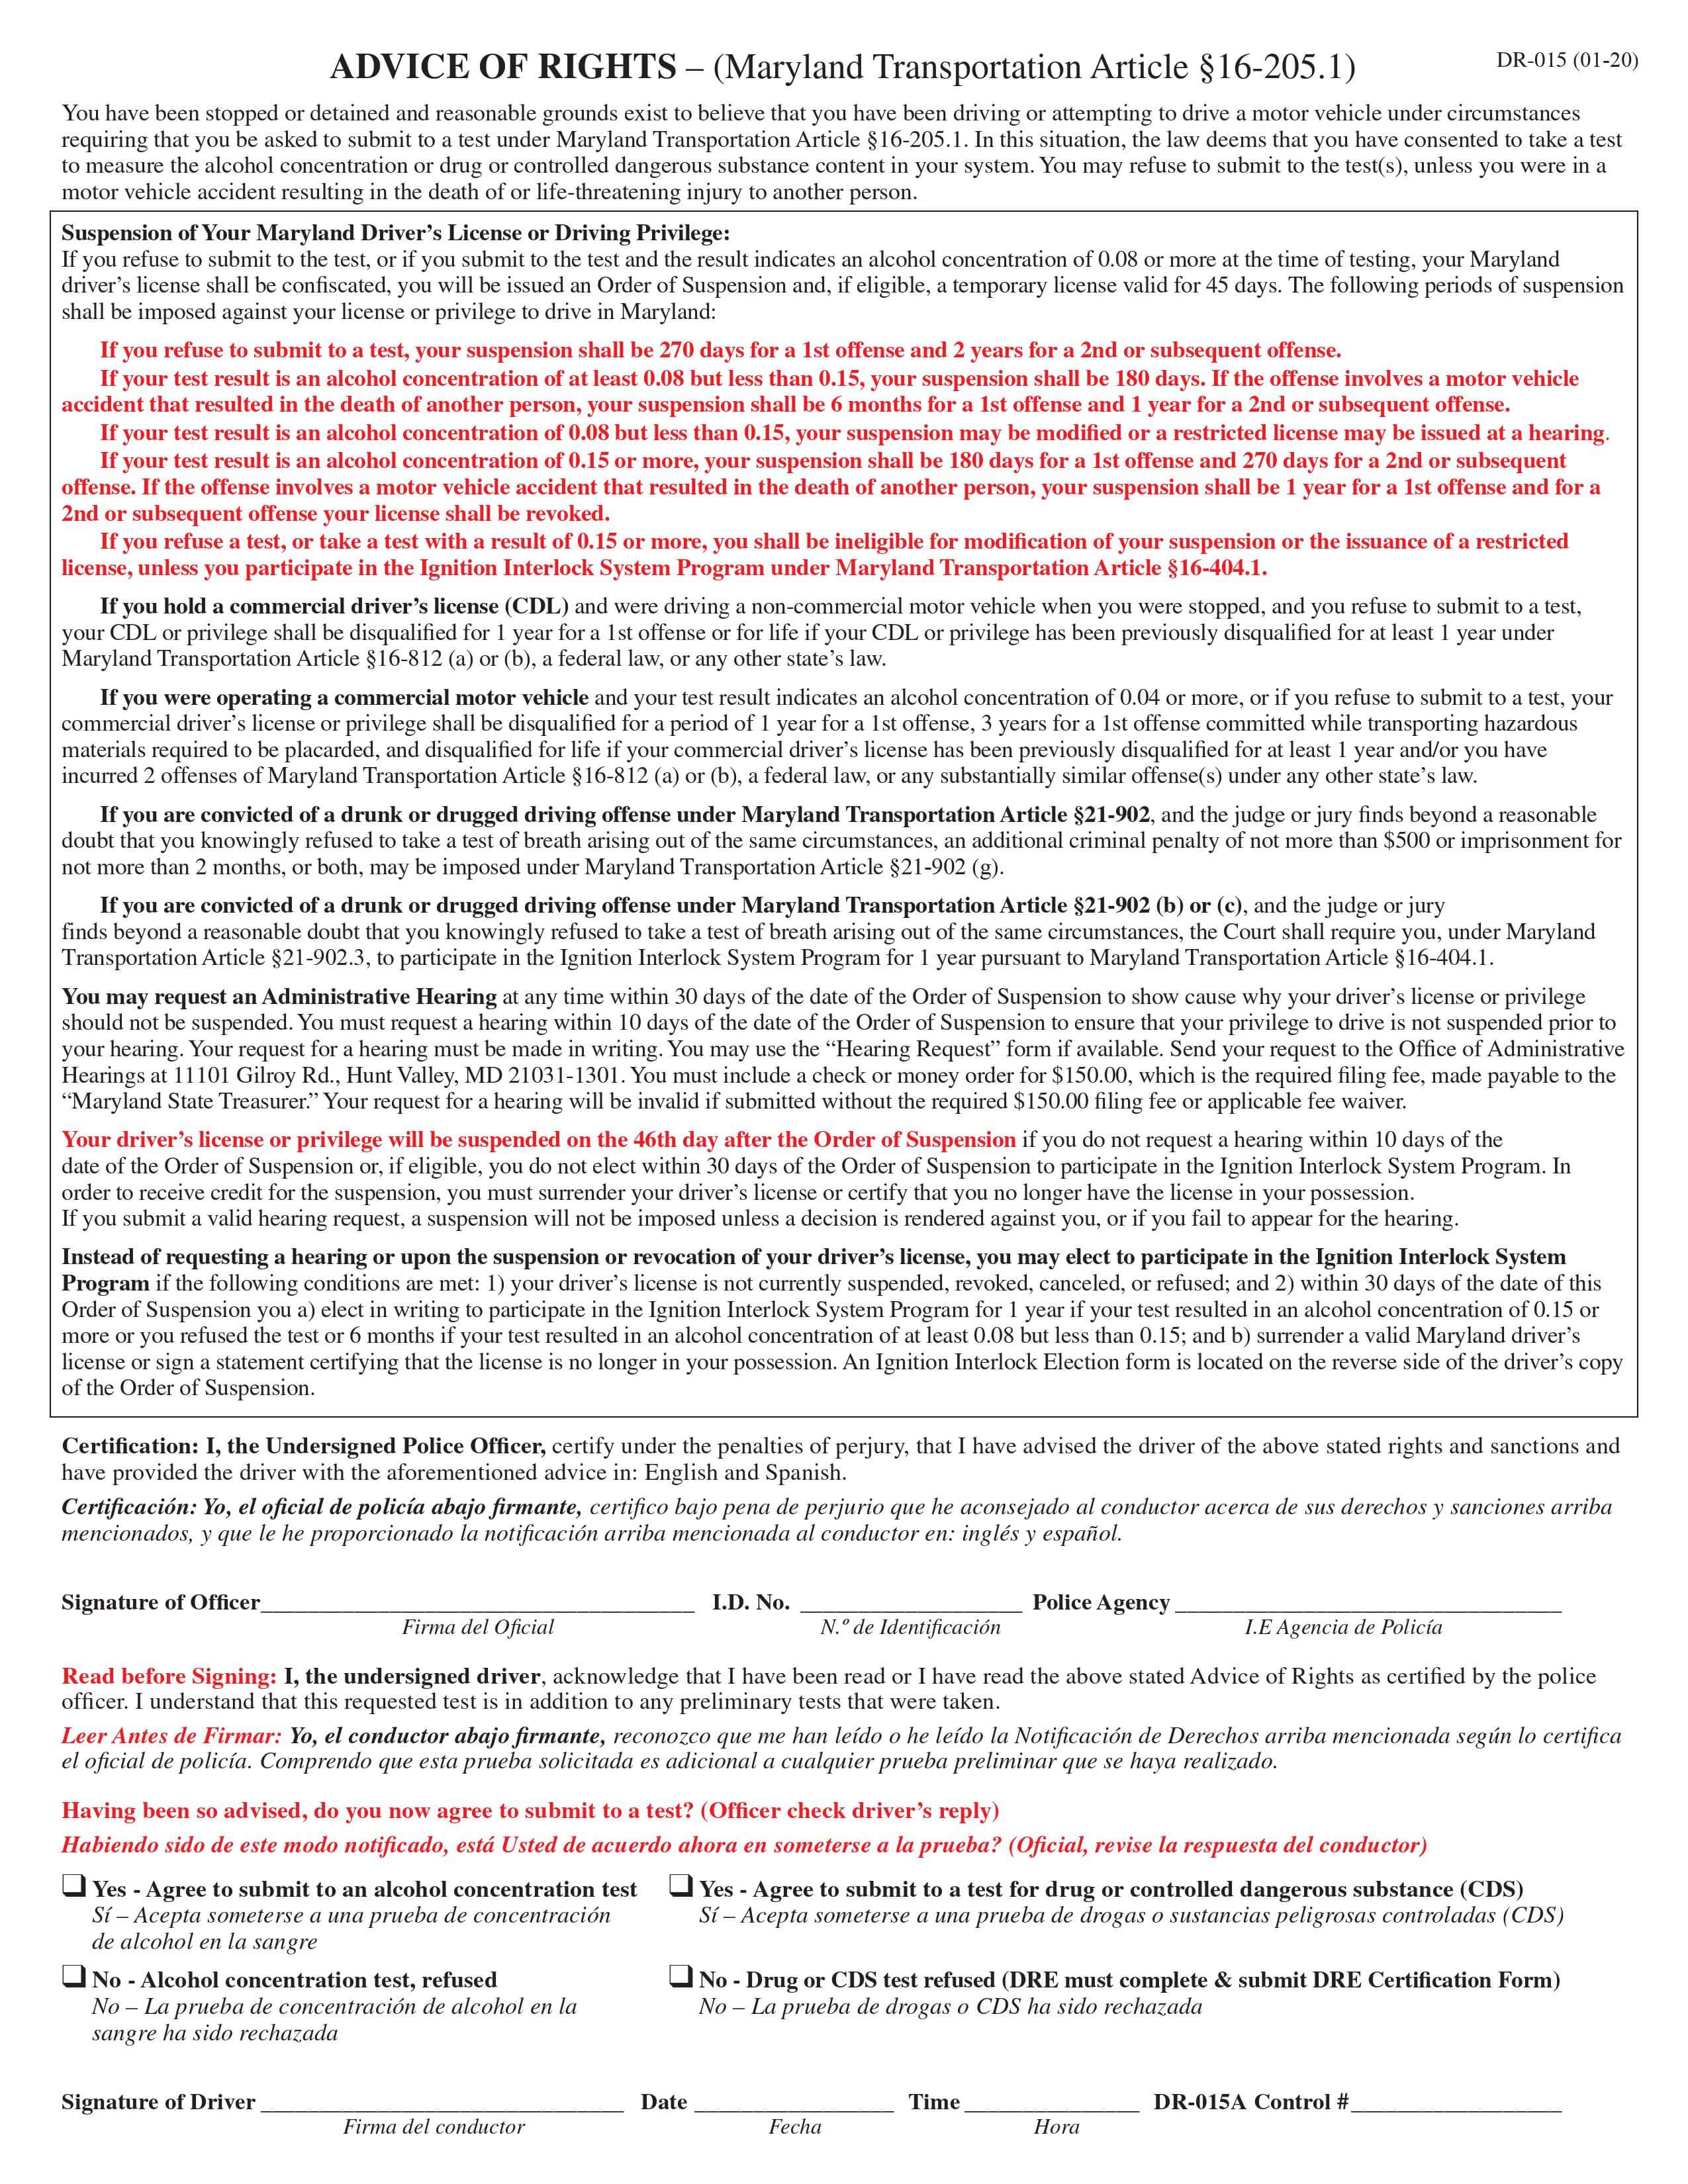 dui advice of rights maryland form side 1